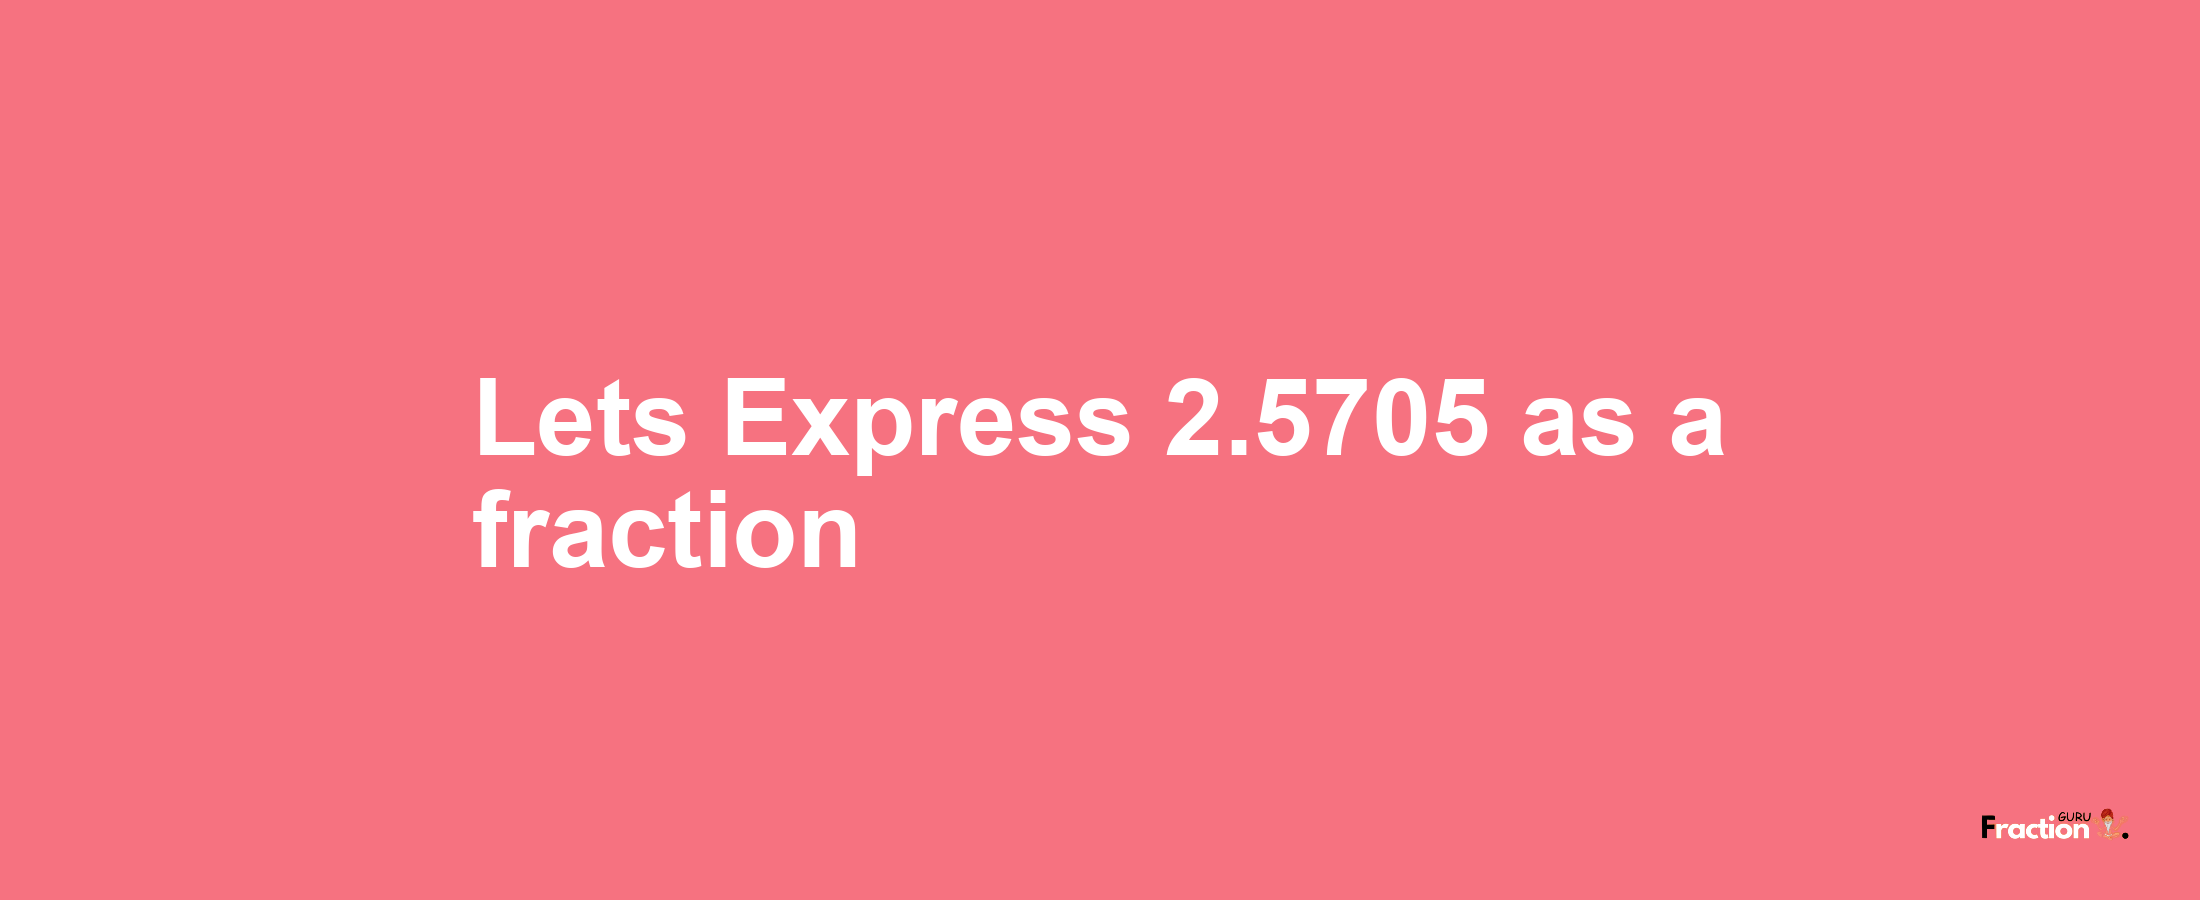 Lets Express 2.5705 as afraction